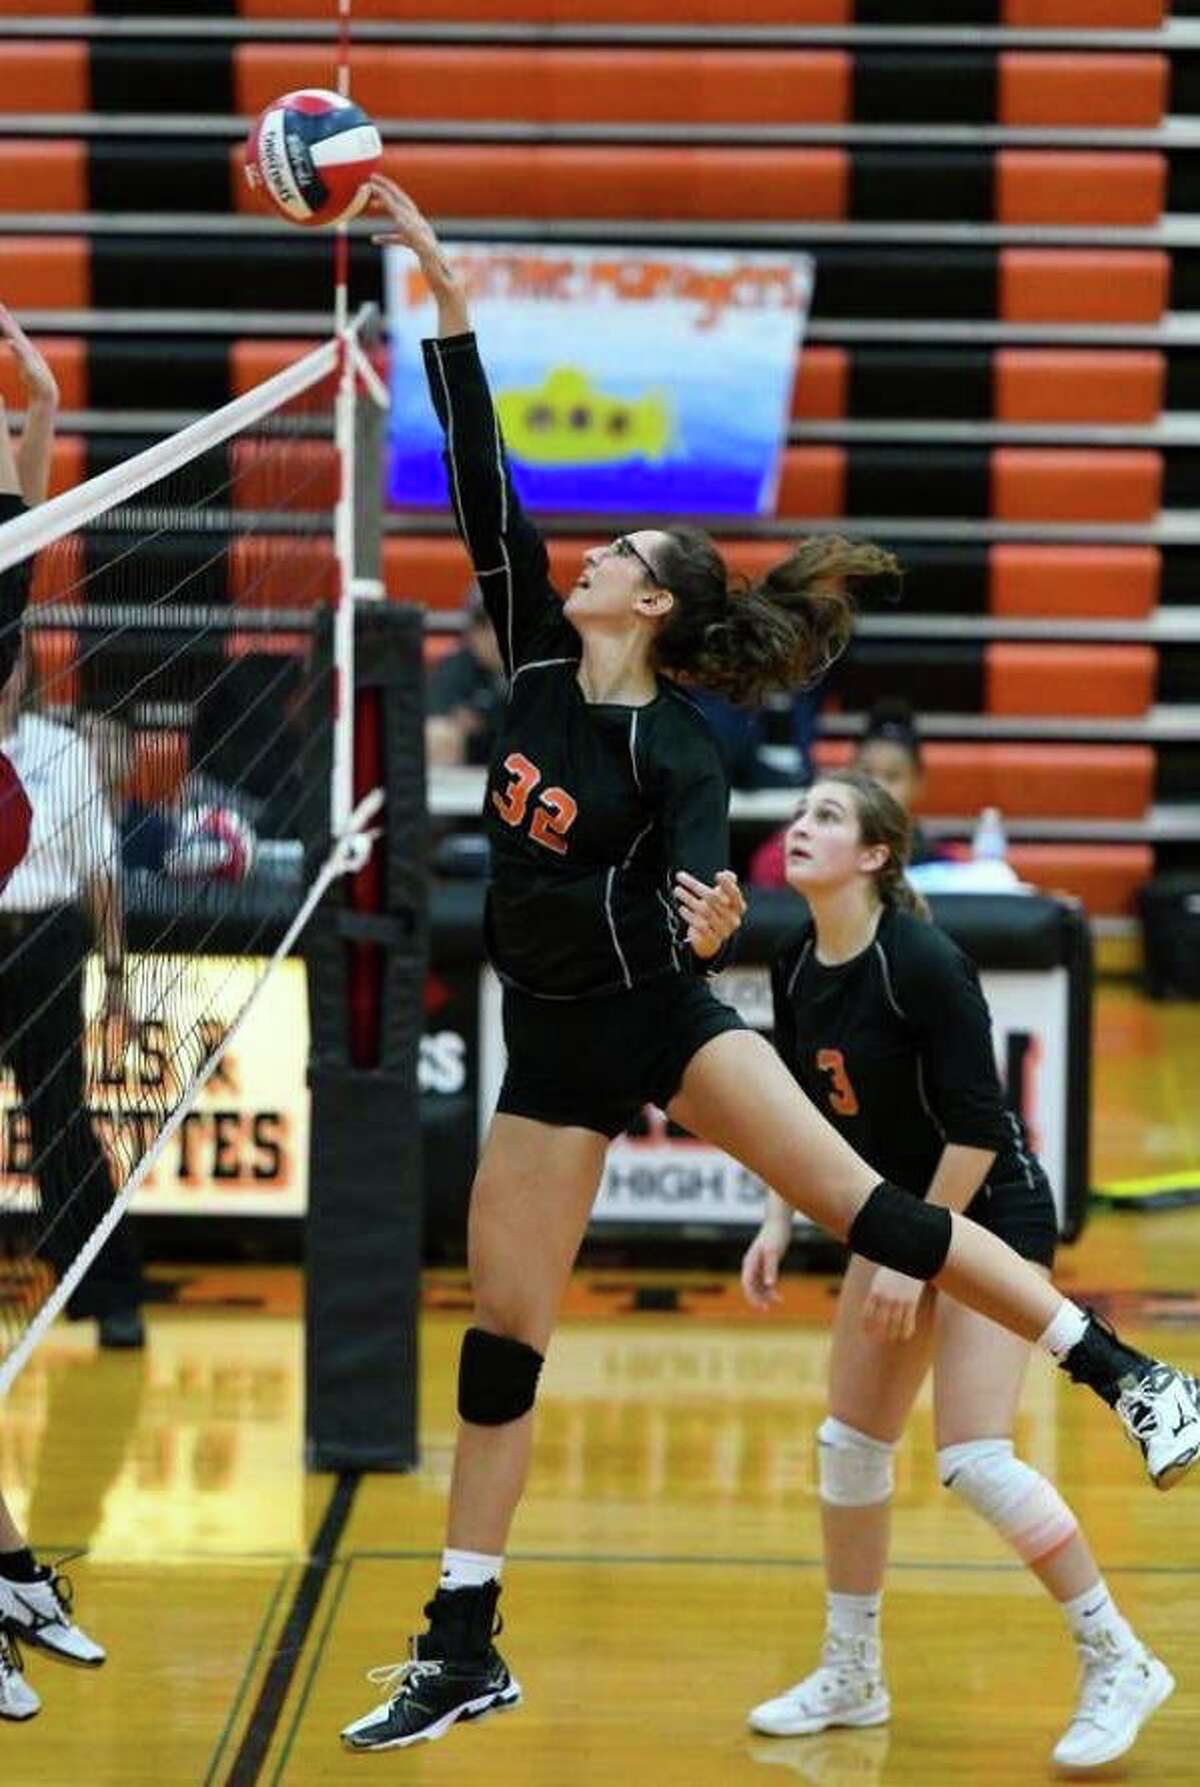 Reem Abdel-Hack is one of Shelton’s top players in the front row.